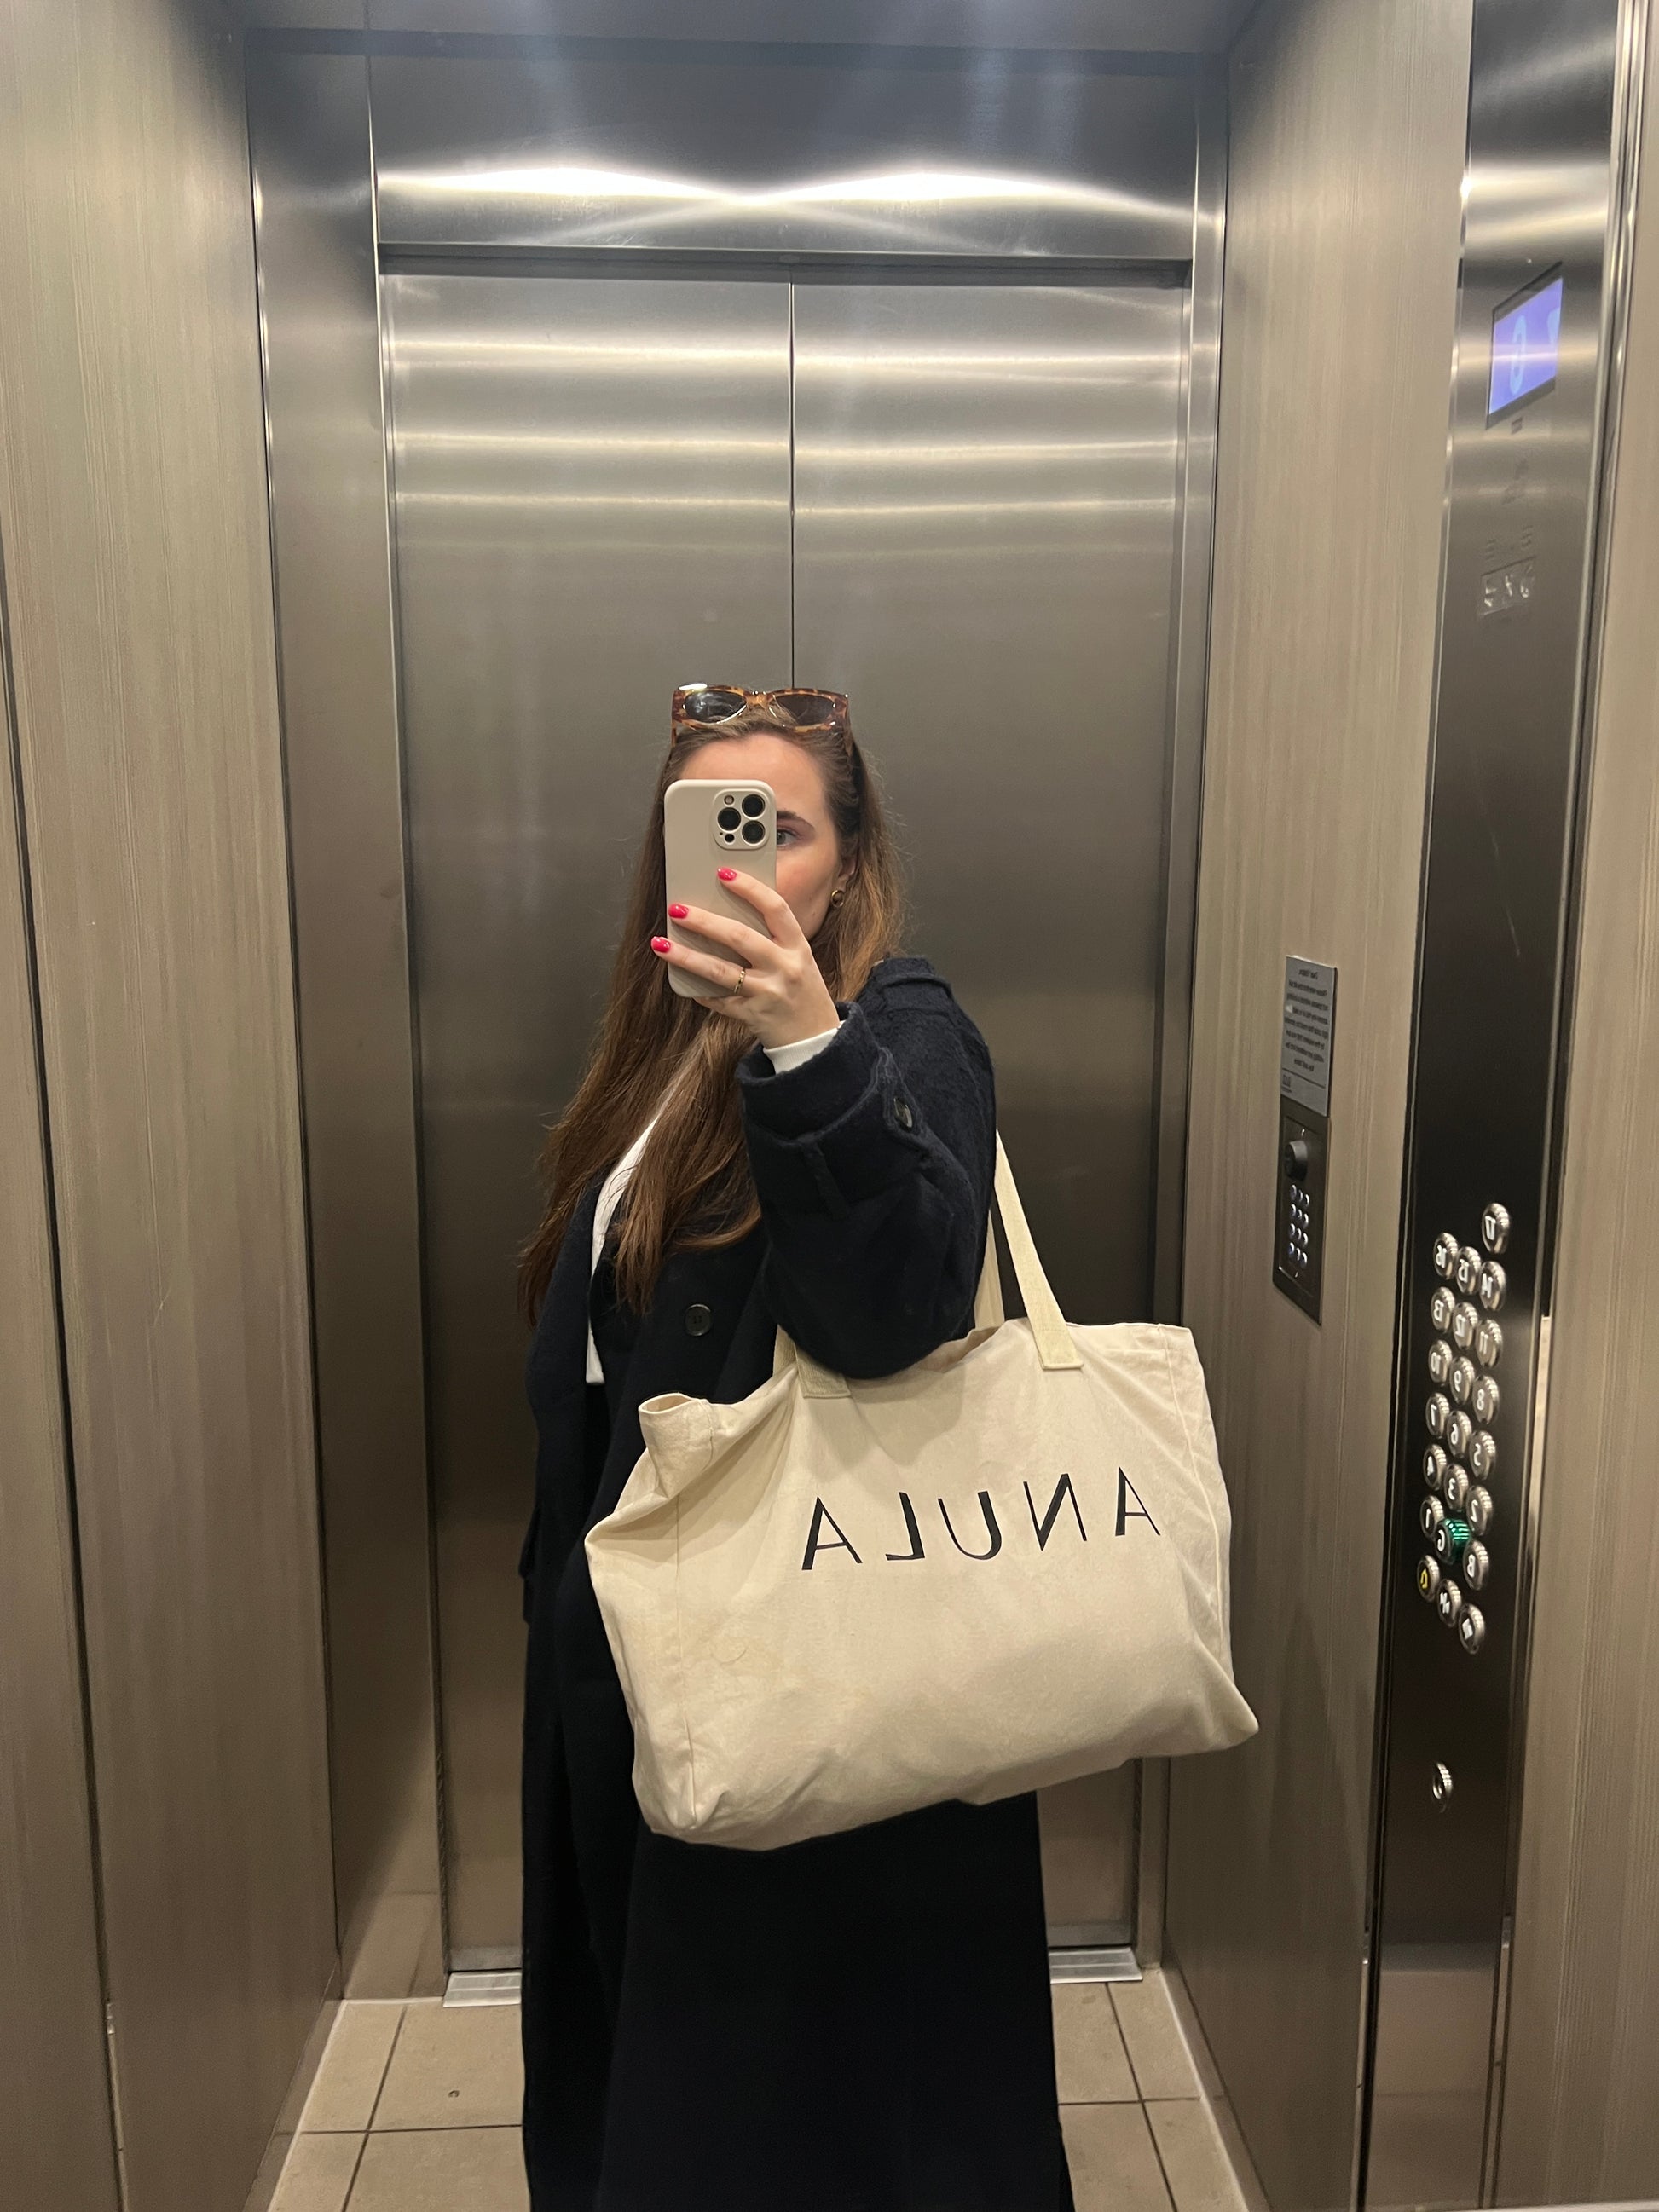 Mirror selfie - woman in lift holding ANULA tote bag